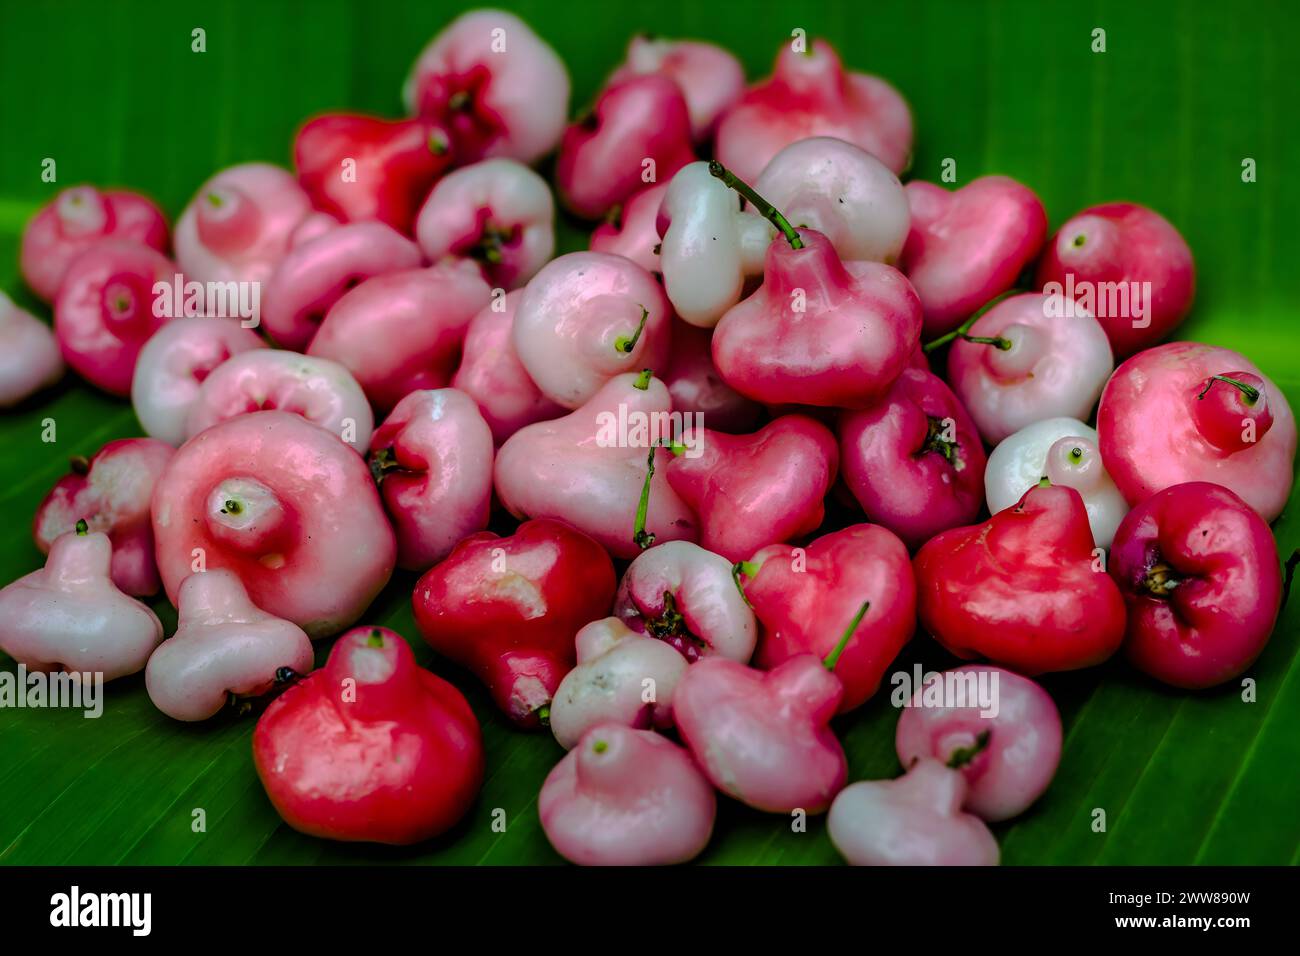 Red rose apple in green background. Stock Photo